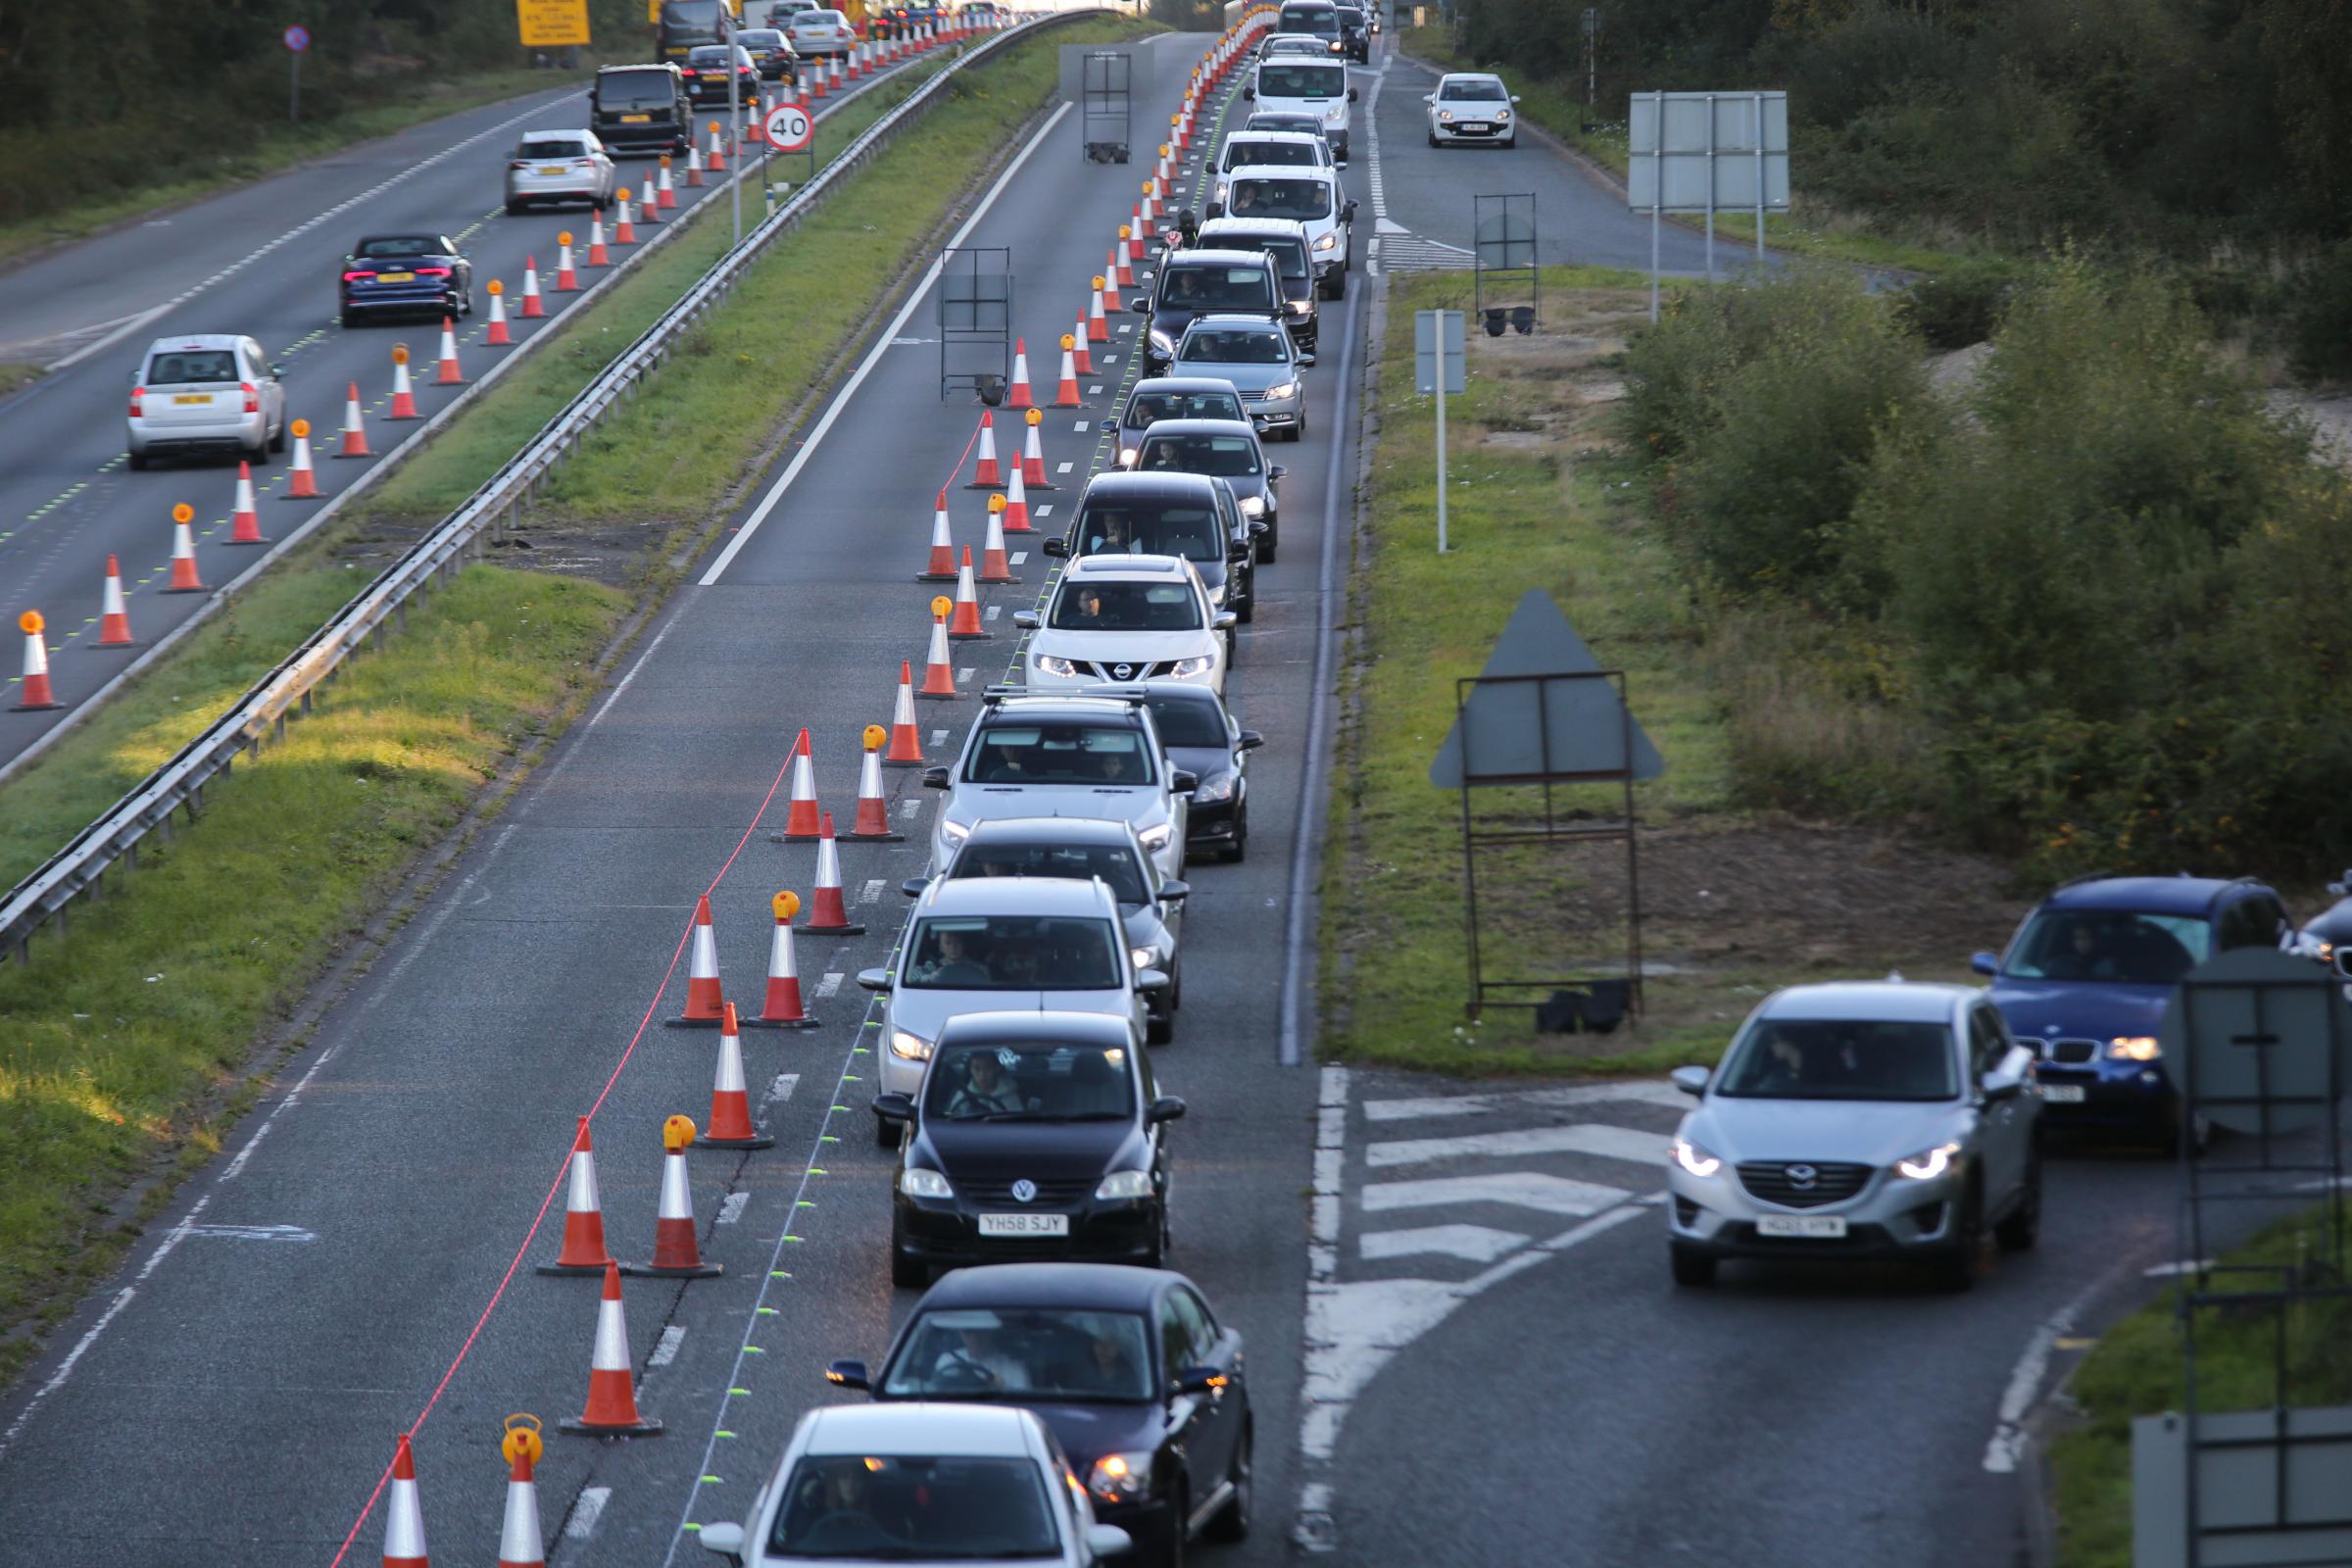 A338 Spur Road to be closed overnight this week ahead of Christmas break